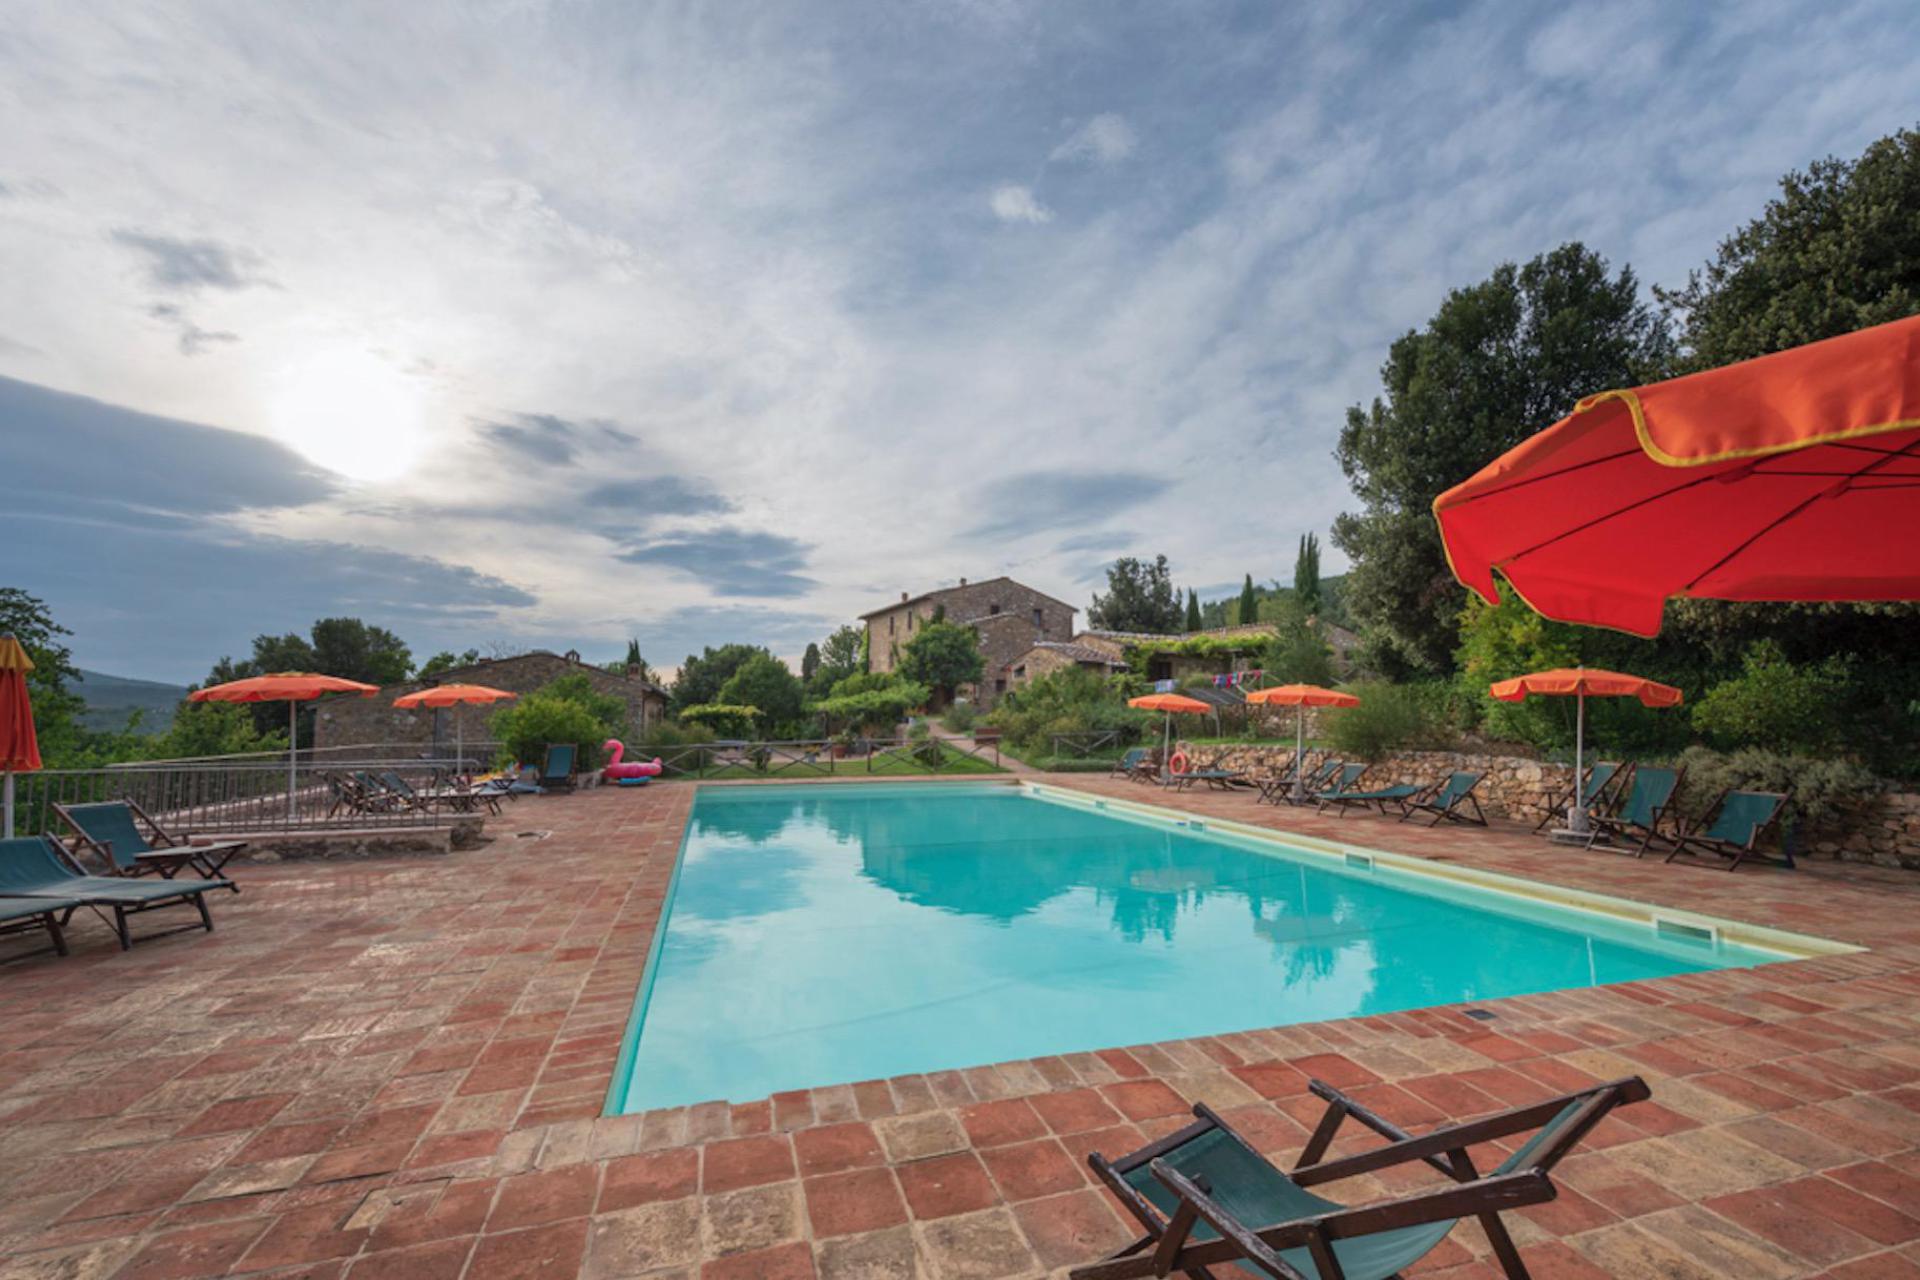 Agriturismo - Farmhouse for lovers of peace and comfort in Tuscany